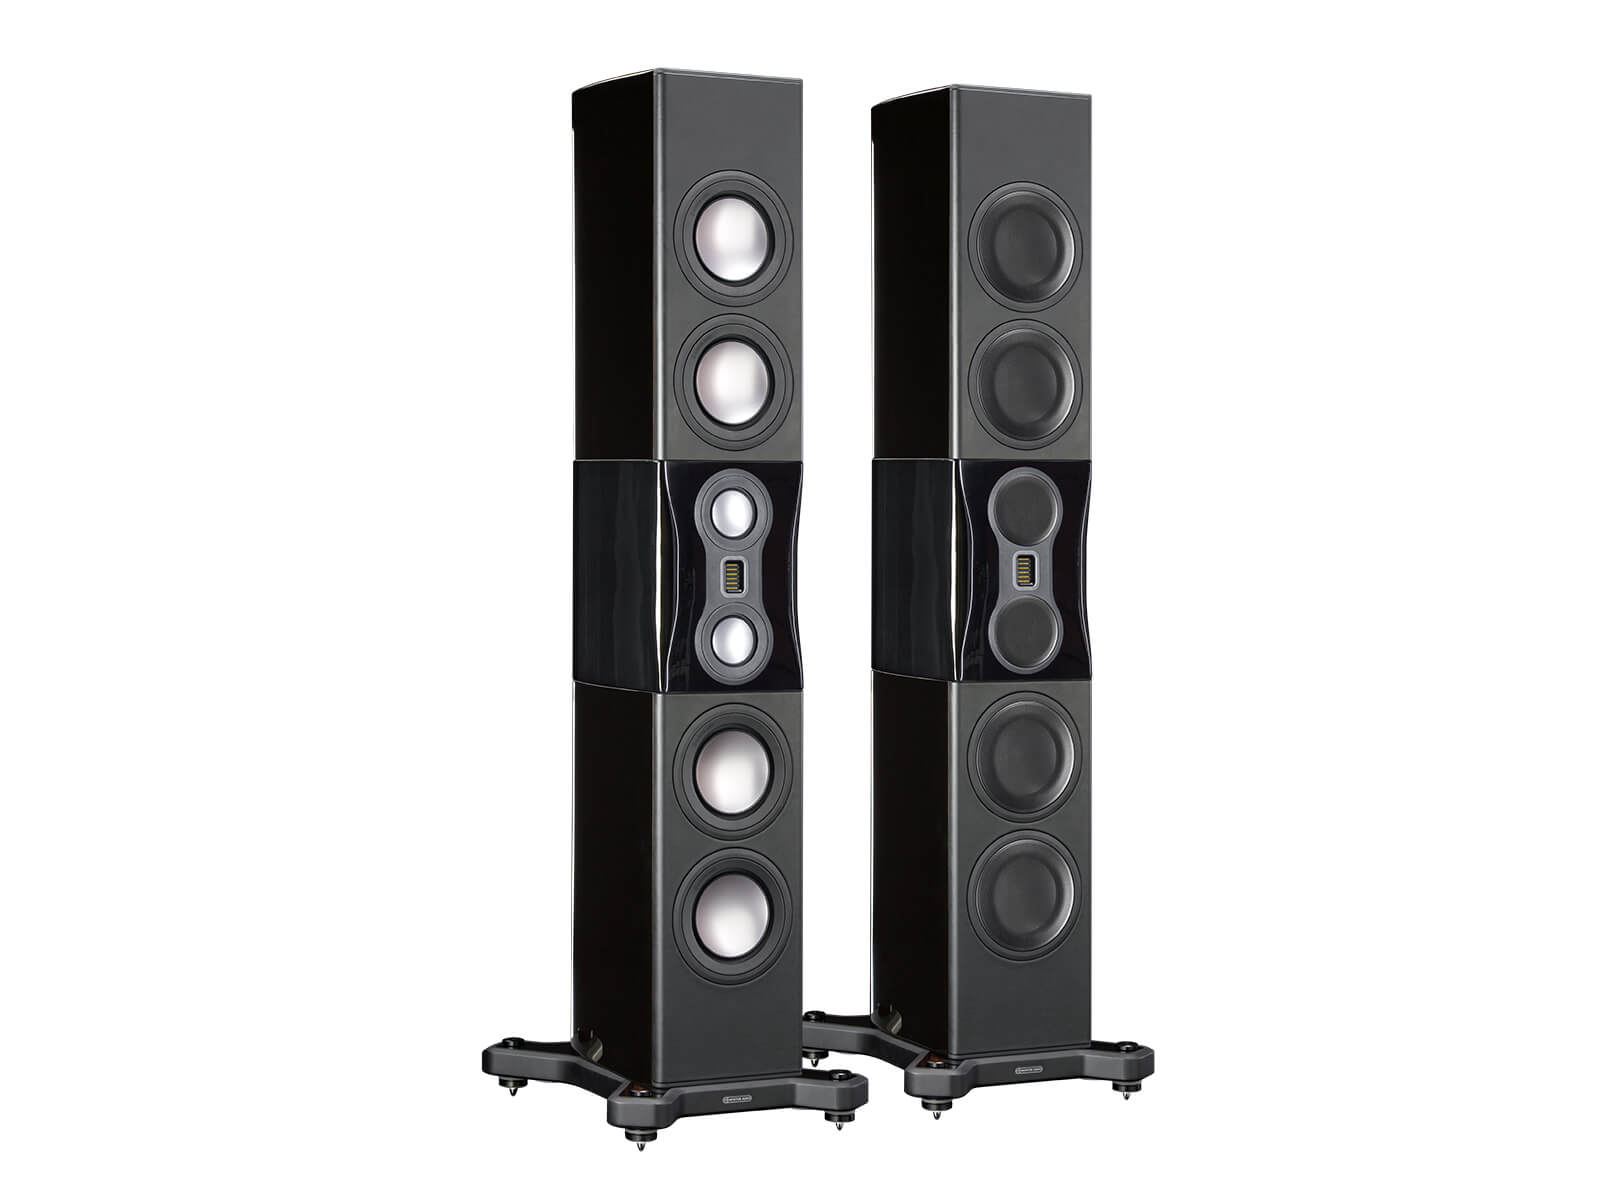 Platinum PL500 II, floorstanding speakers, featuring a grille and an ebony real wood veneer finish.